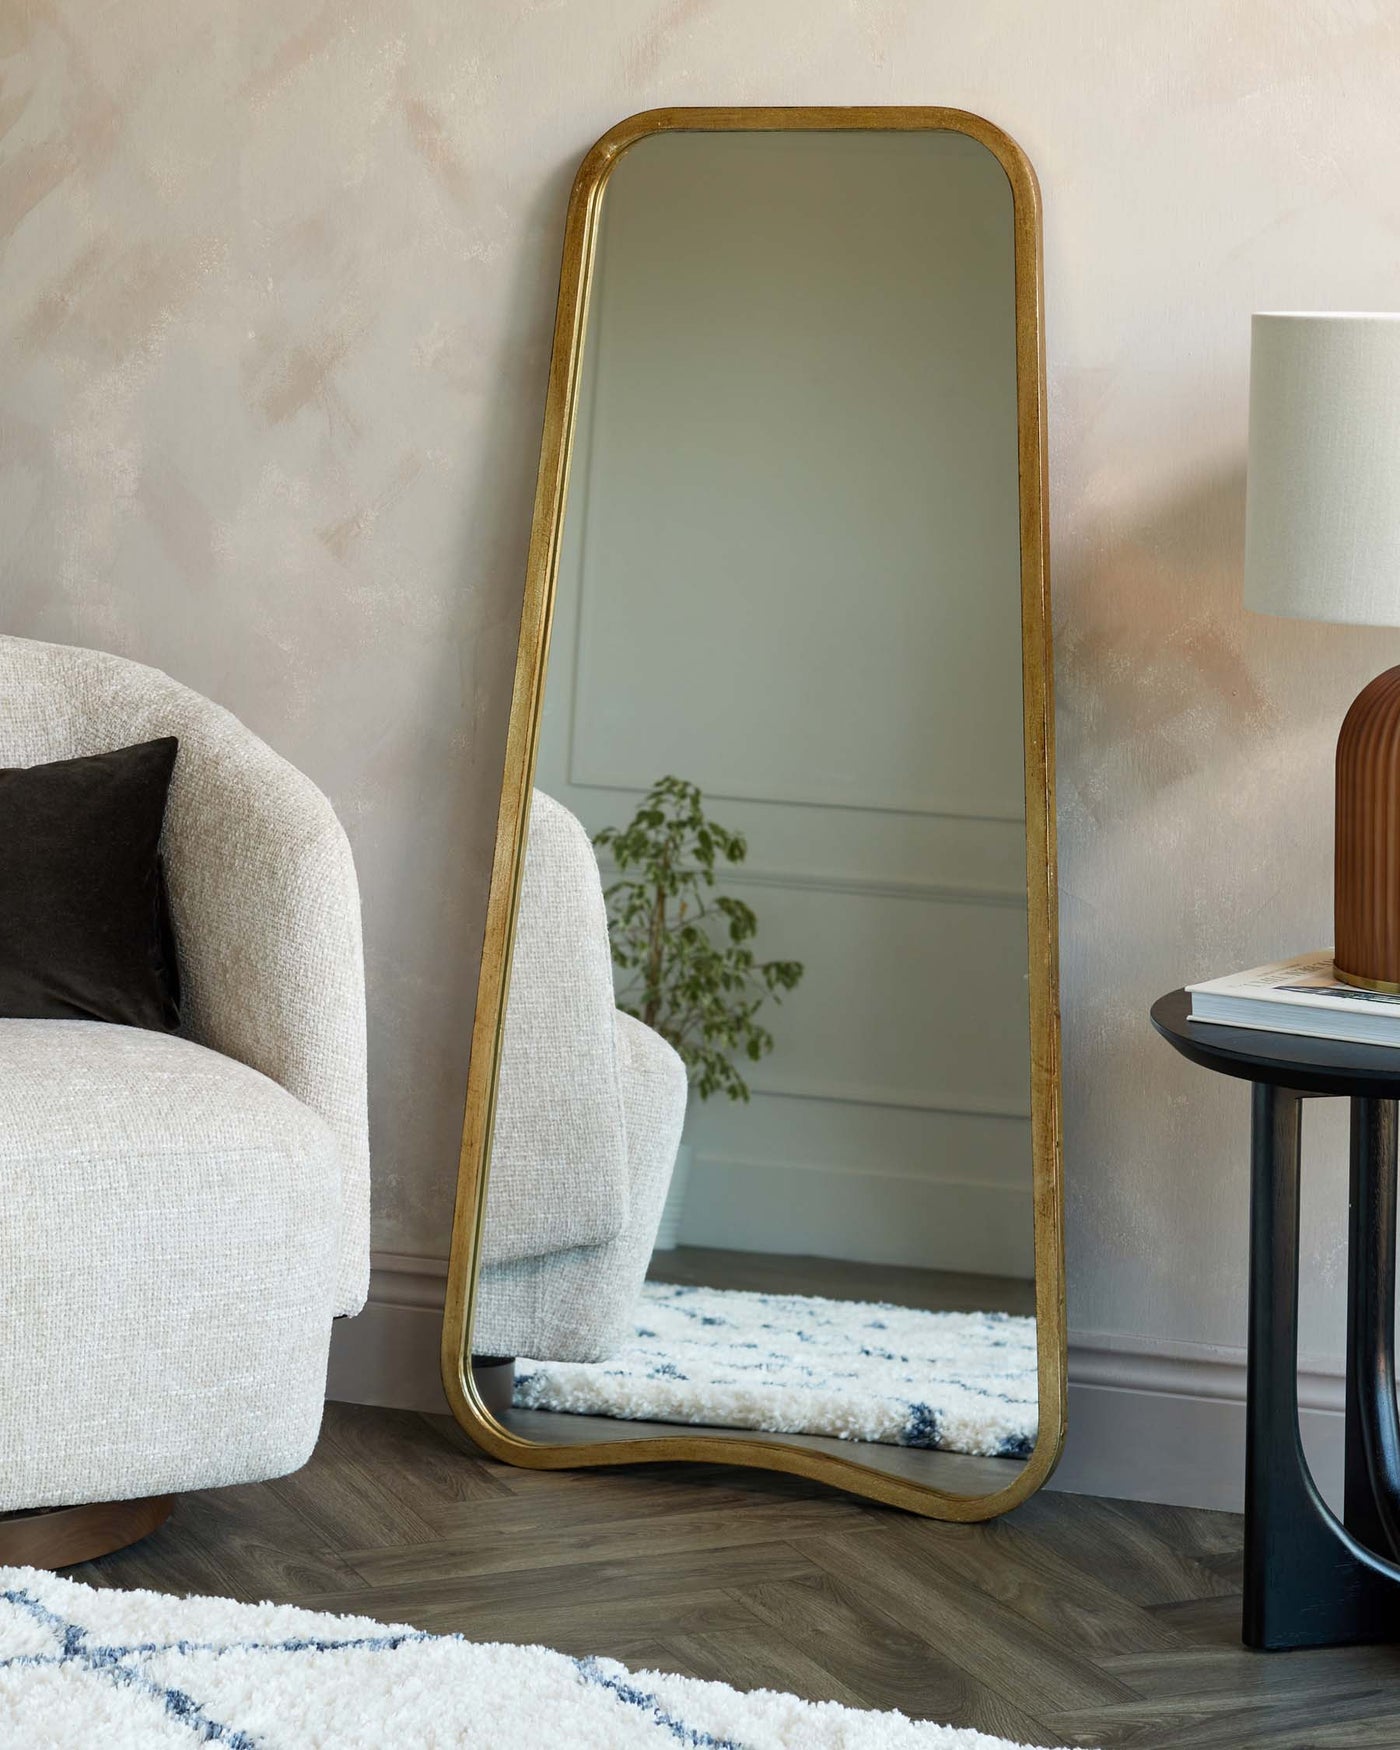 A modern, plush, off-white textured armchair with a black pillow to the left, a large free-standing arched mirror with a slim golden frame leaning against a textured wall, an elegant black side table with a circular top and three slender, slightly splayed legs to the right, and a textured white and blue rug on the floor.